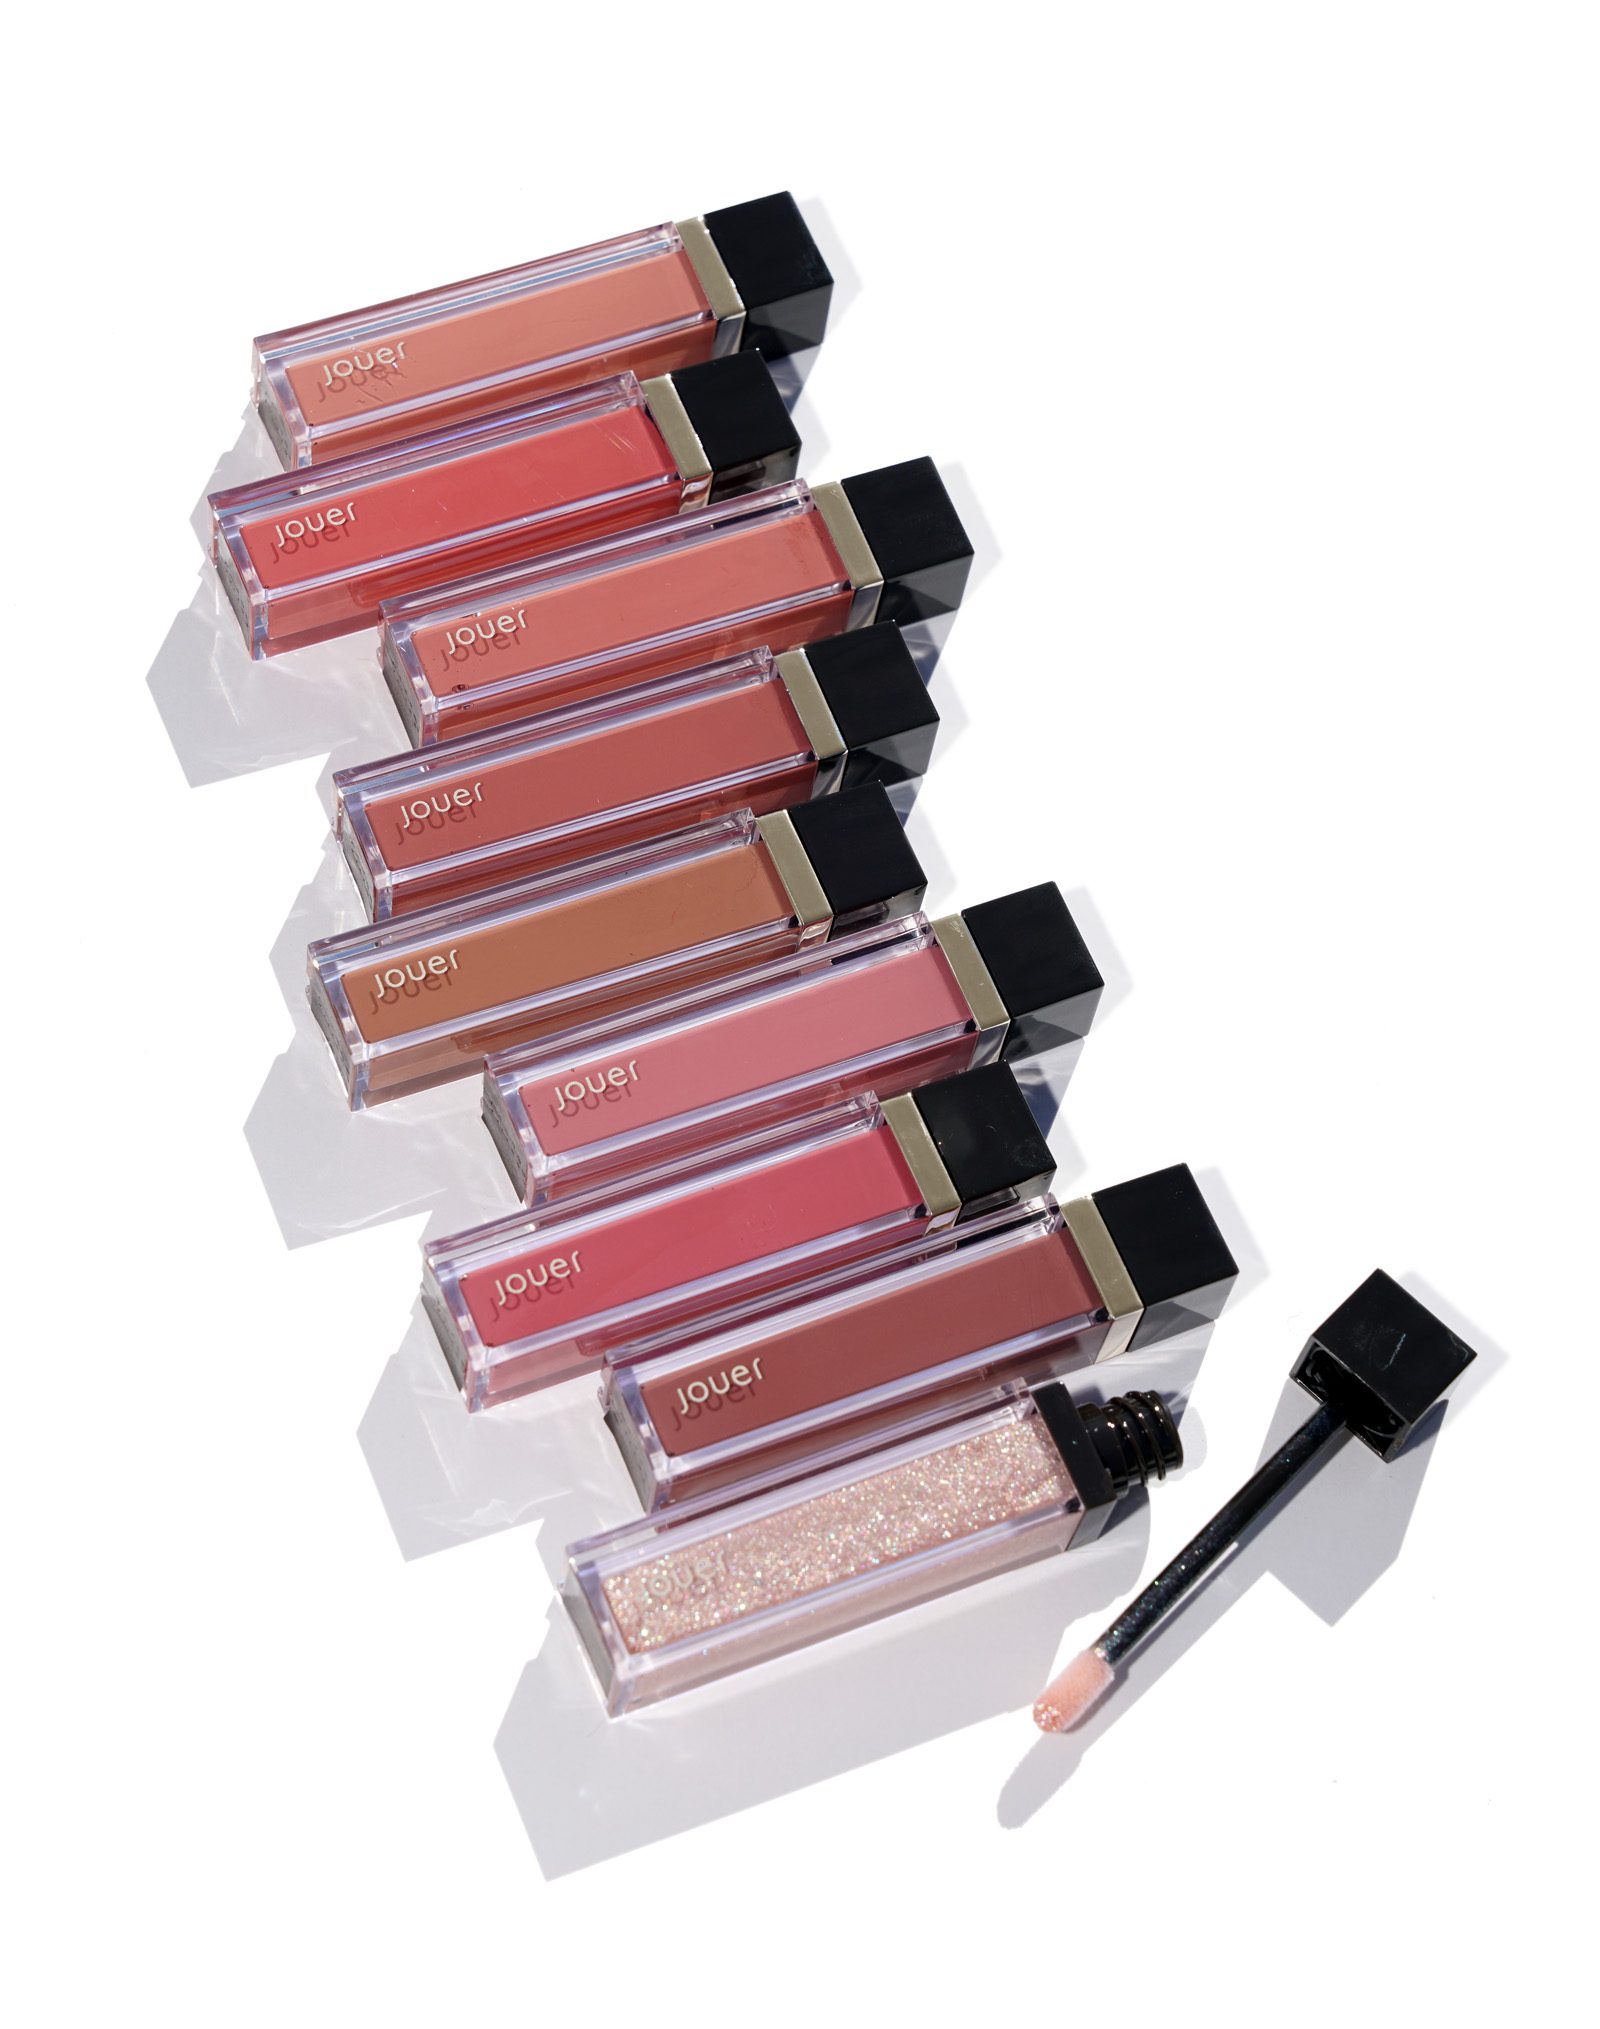 Jouer High Pigment Lip Gloss and Lip Topper - The Beauty Look Book